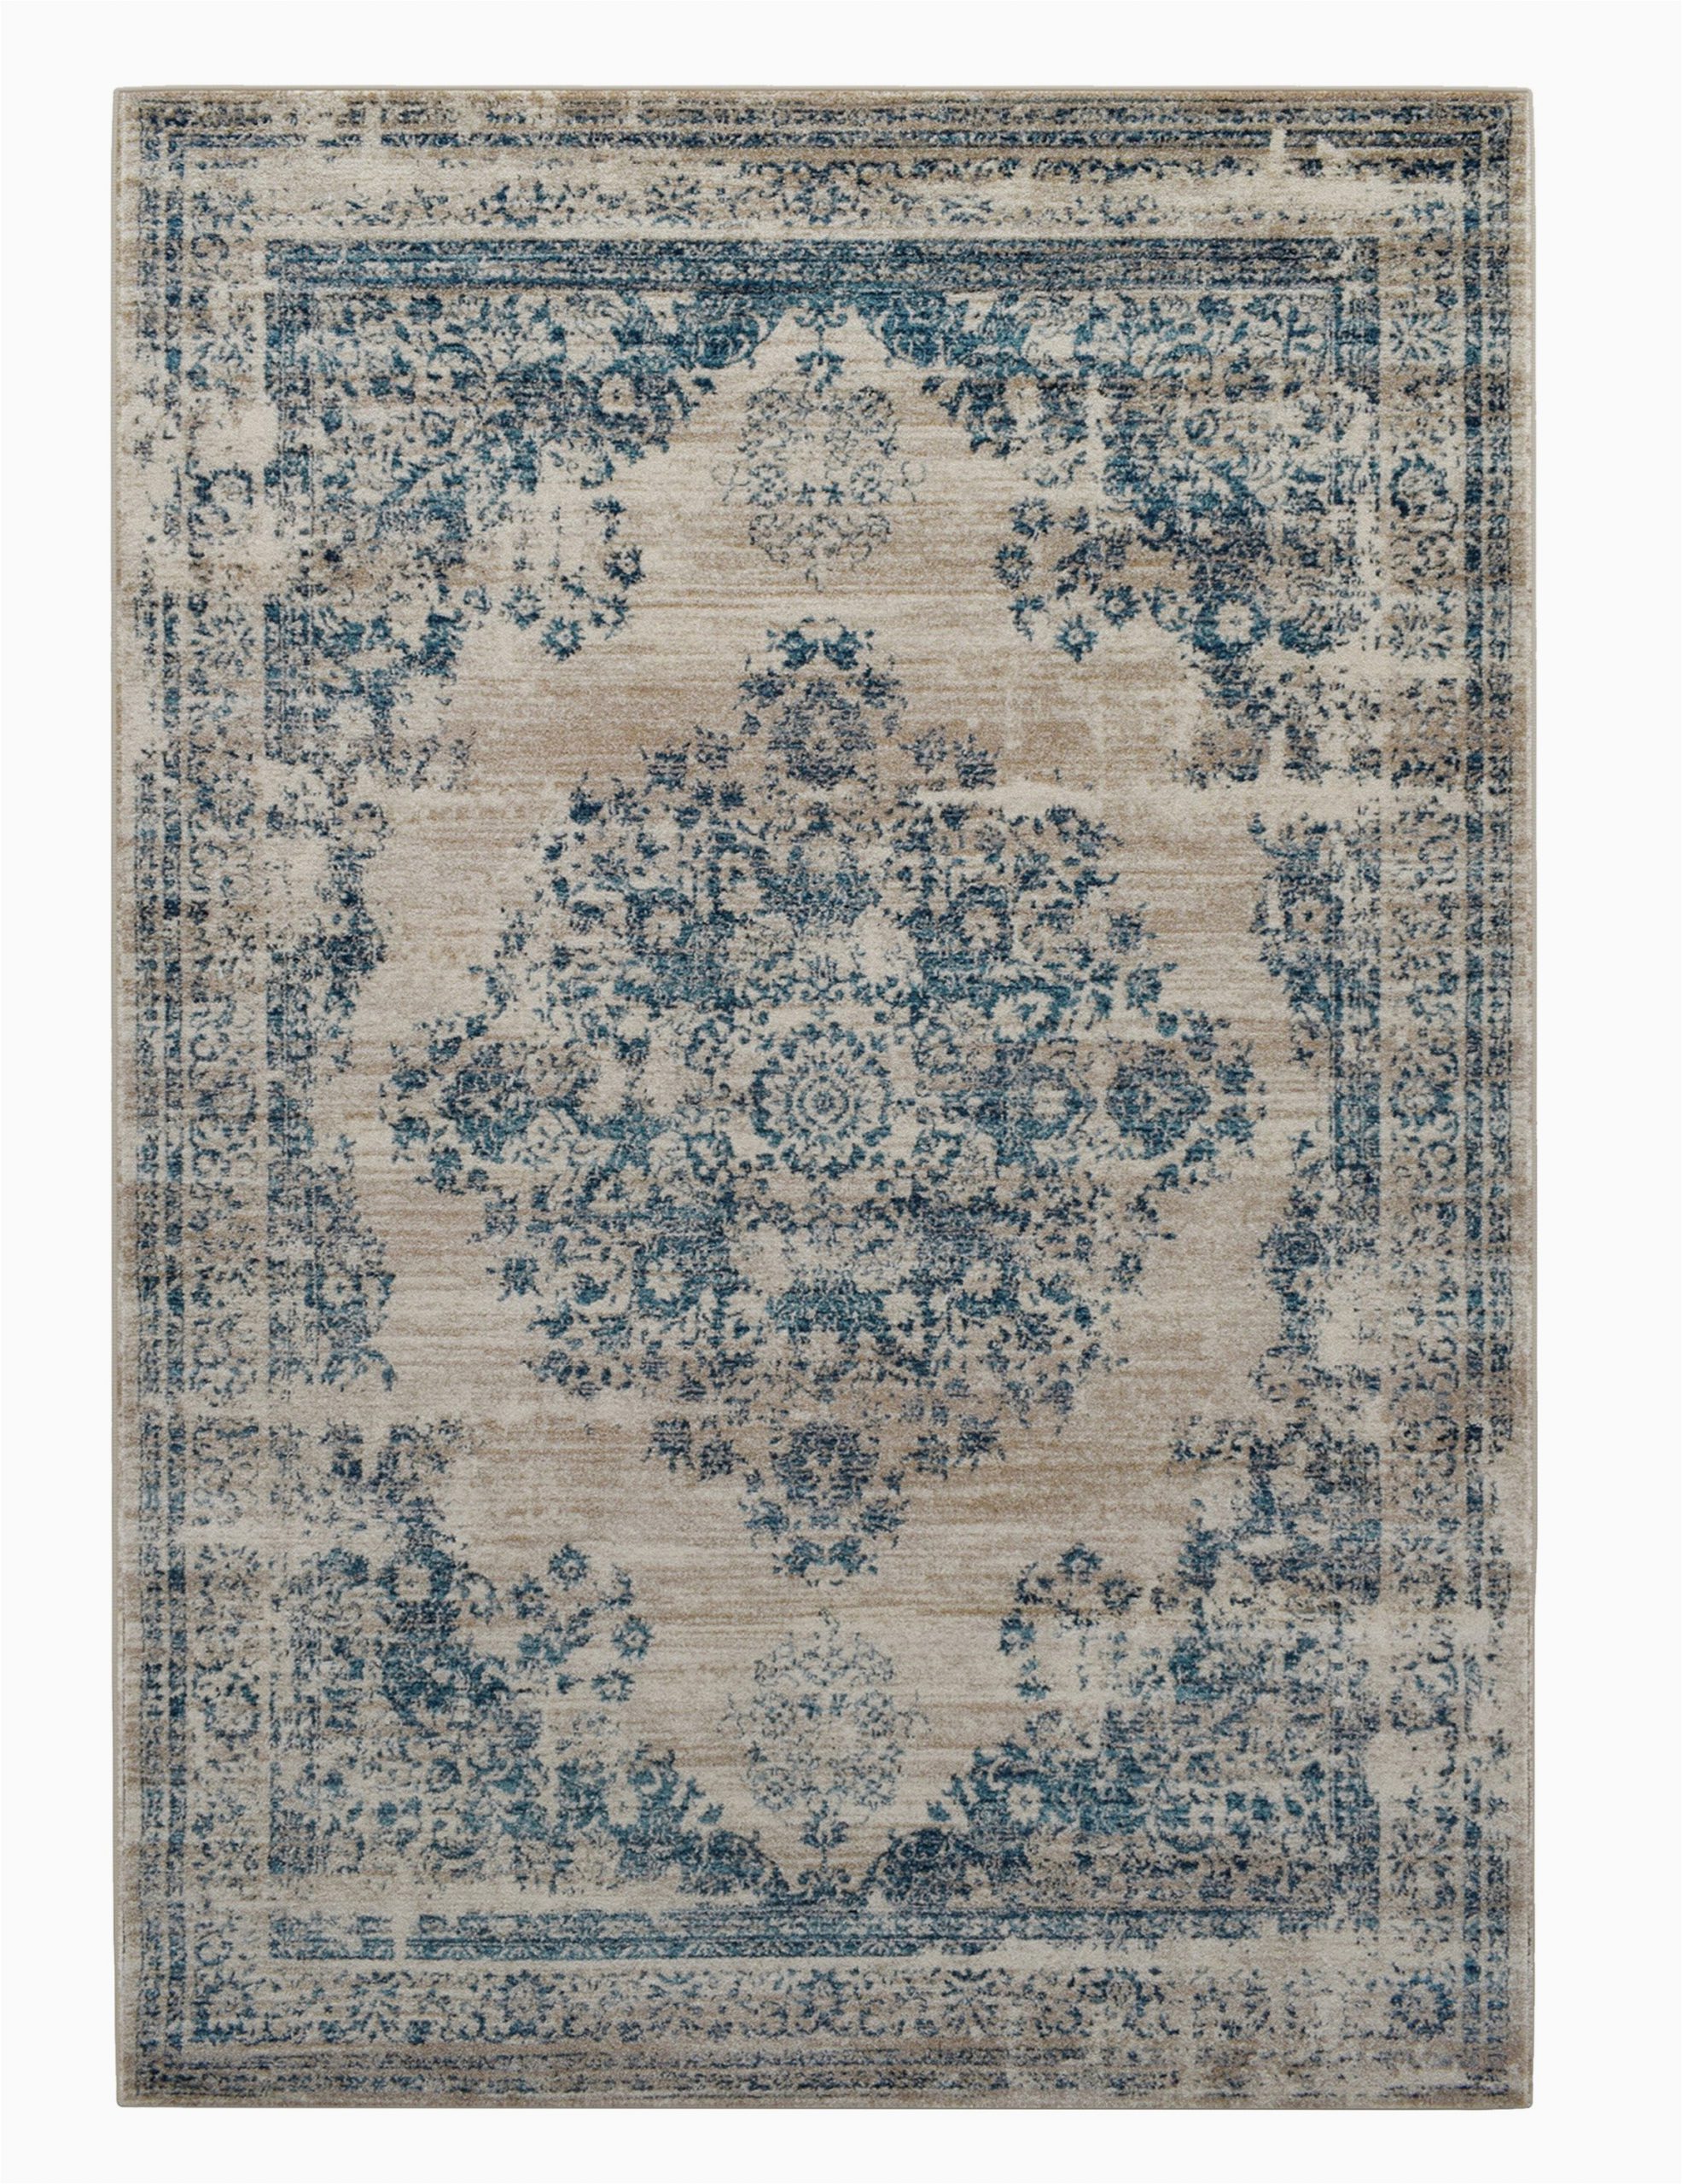 Area Rugs by Bungalow Rose Loewen Floral Shag 5 3 X 7 7 Blue area Rug